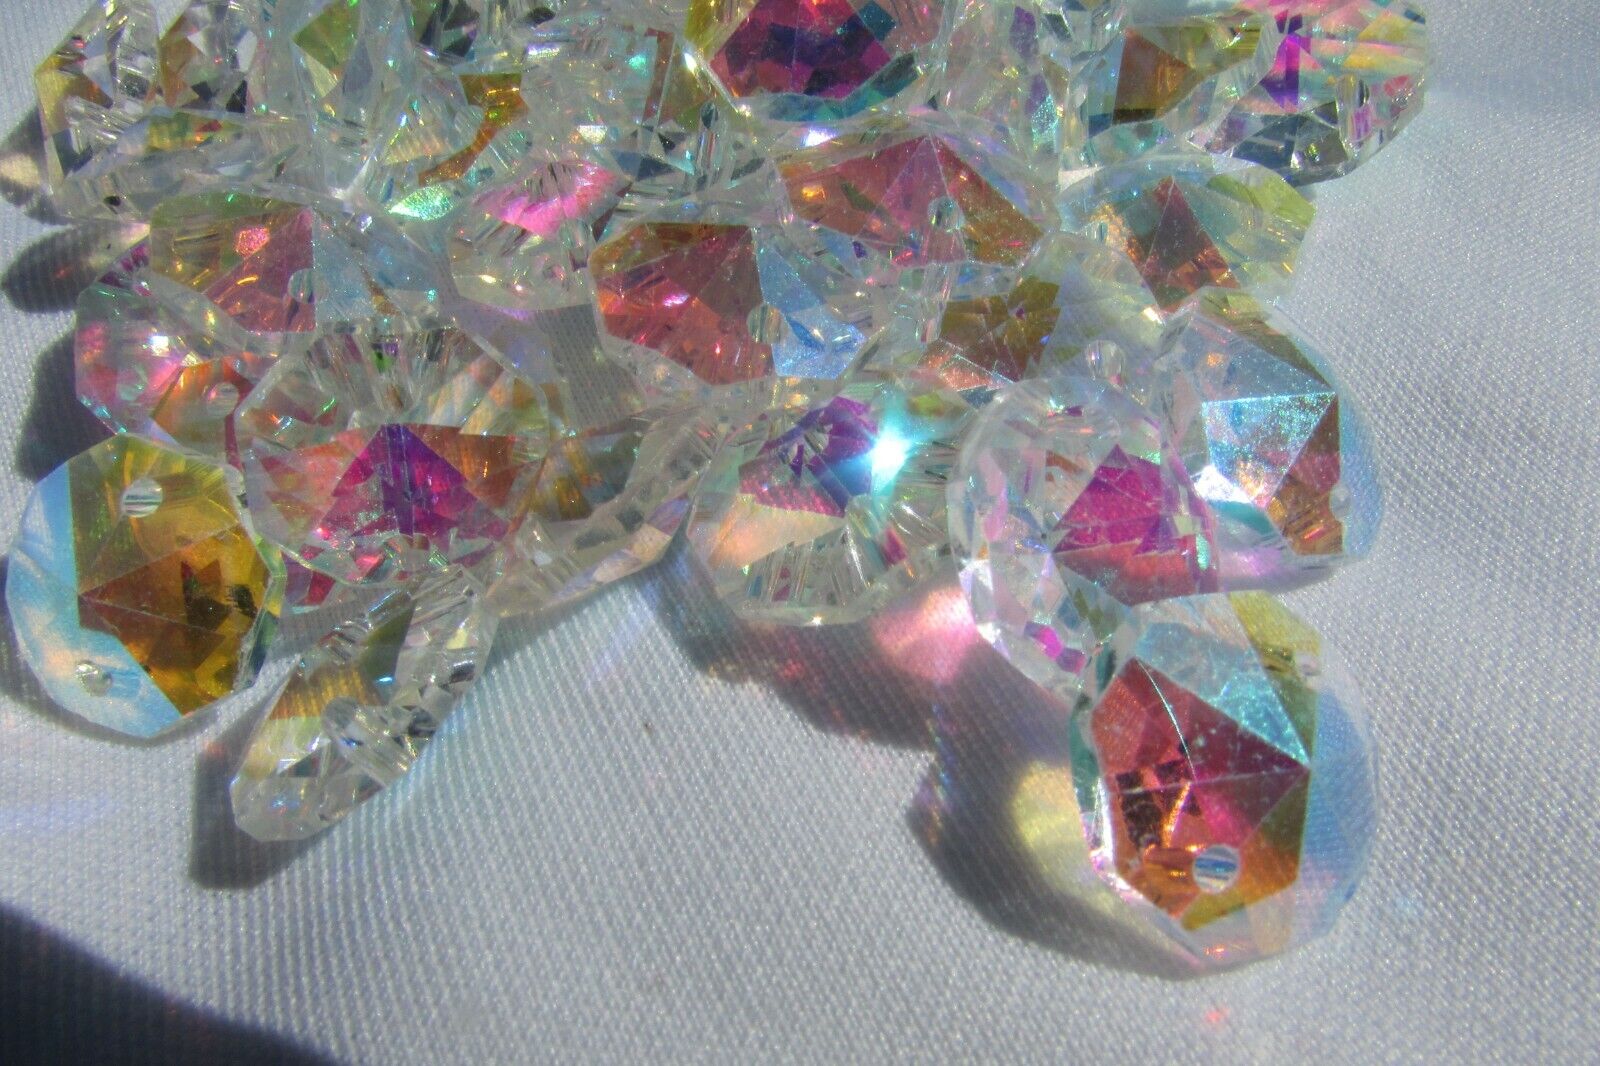  200- 14MM AB color AAA 2 HOLE OCTAGON CRYSTAL GLASS BEADS CHANDELIER Без бренда - фотография #4